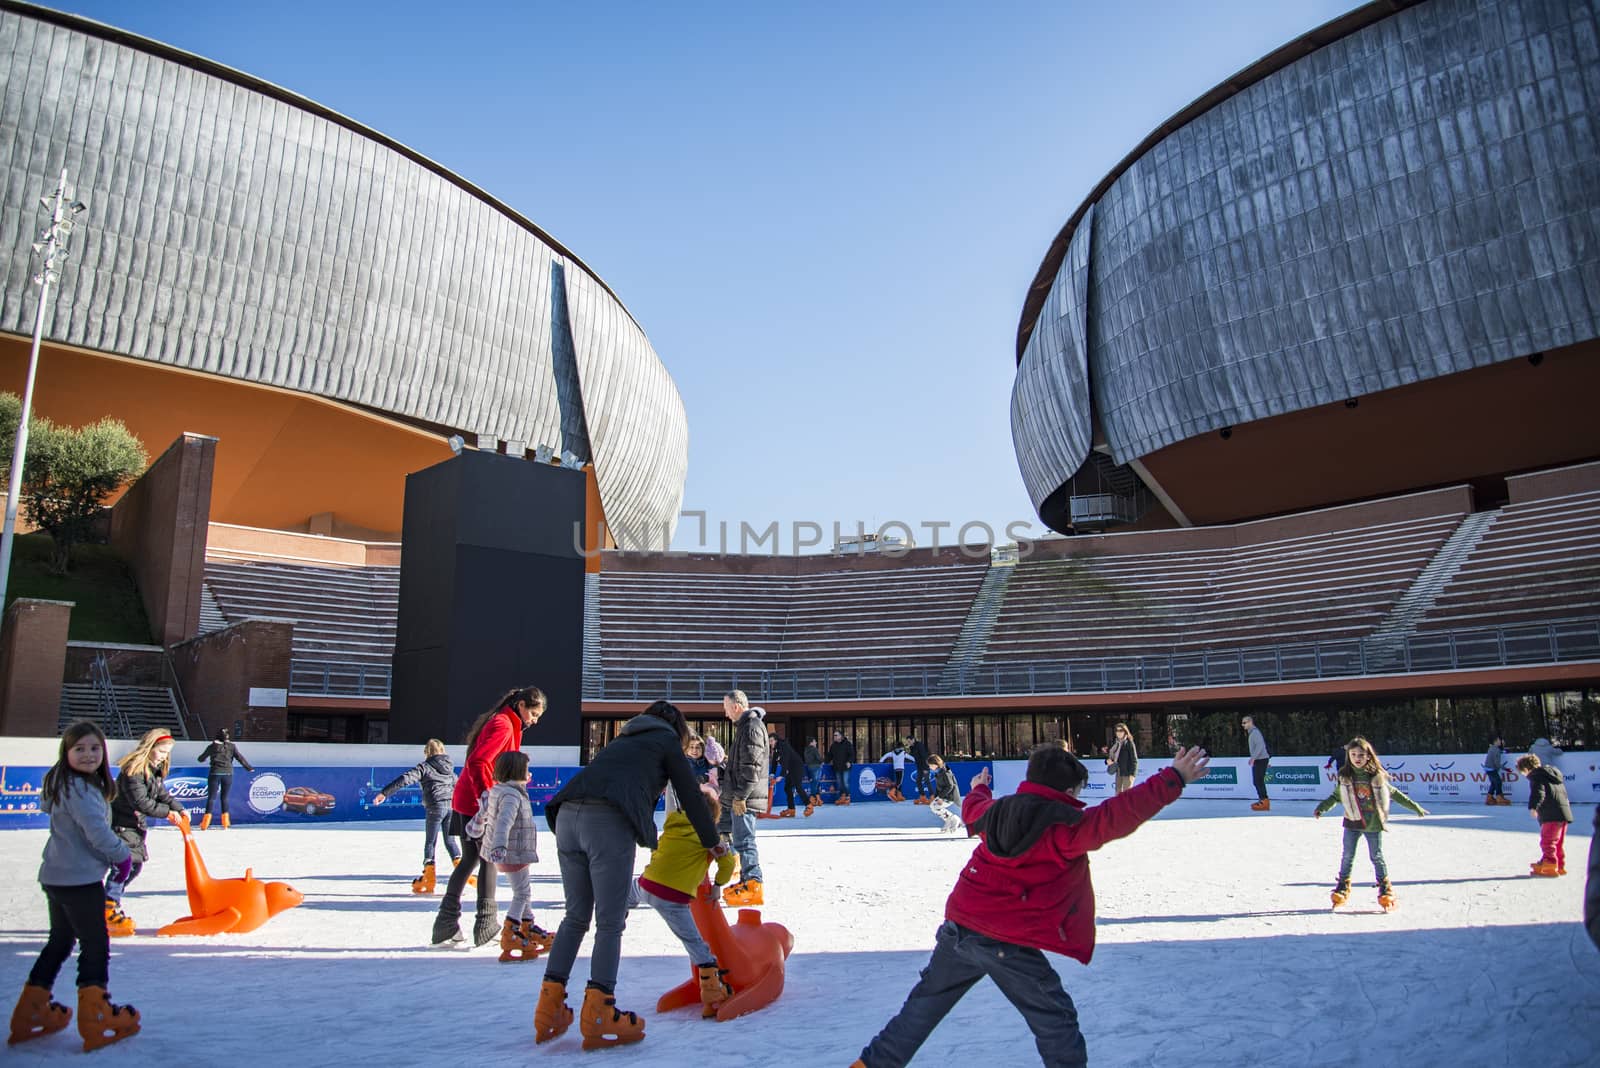 ROME - JANUARY 5, 2015: Ice skating ring outside the Auditorium Parco della Musica, large public music complex designed by Italian architect Renzo Piano on January 5, 2017 in Rome, Italy